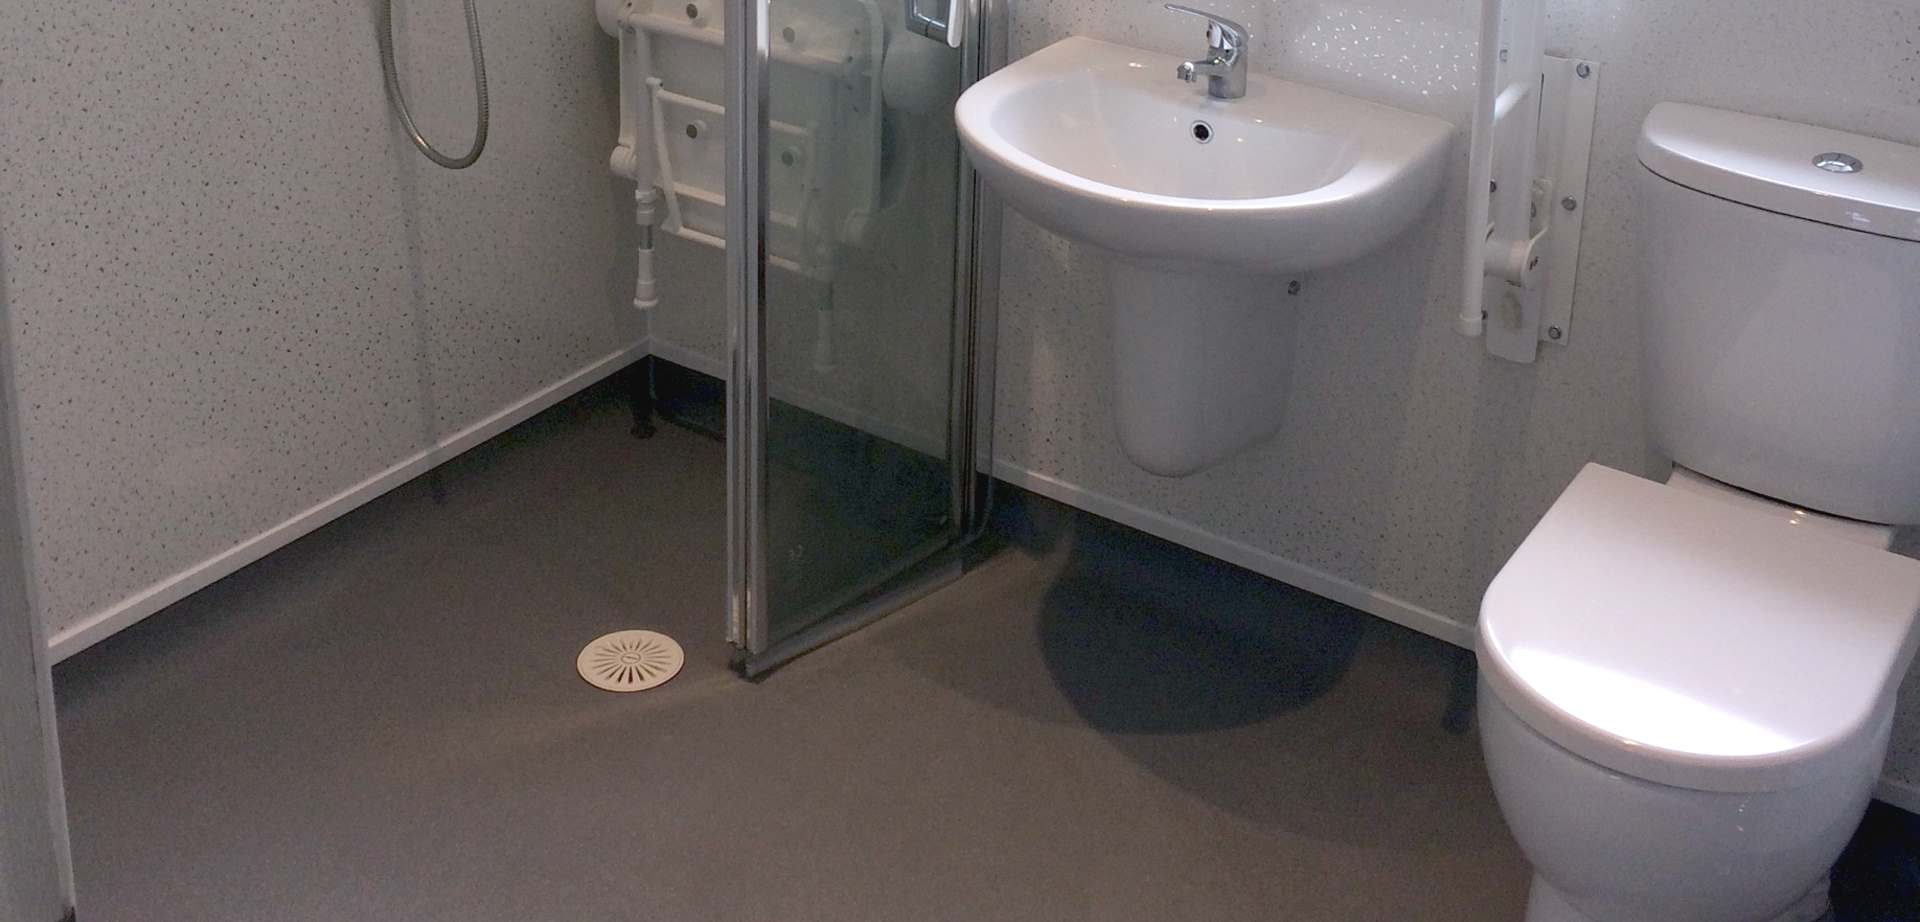 Wetroom Installers in Sutton Coldfield and The Midlands